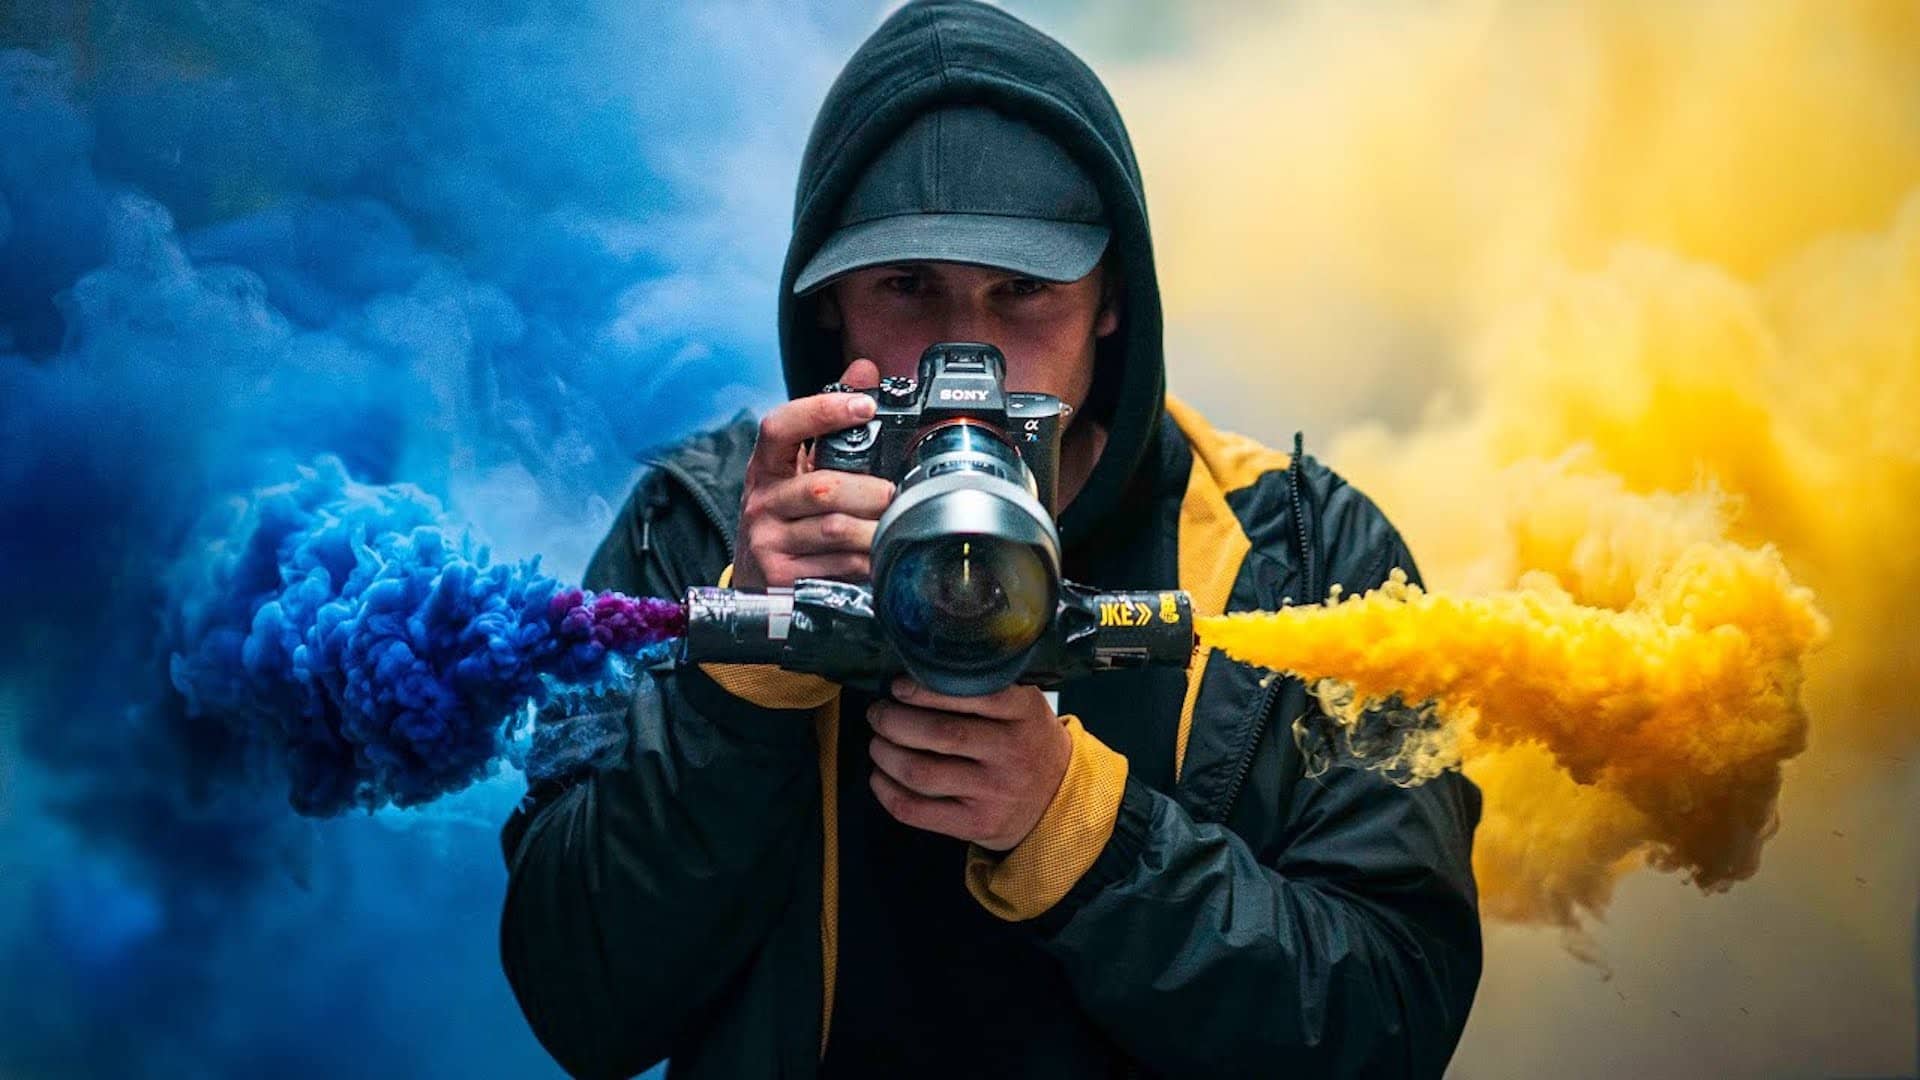 Color Smoke Bomb Photography Ideas - Pictures - Sunny 16